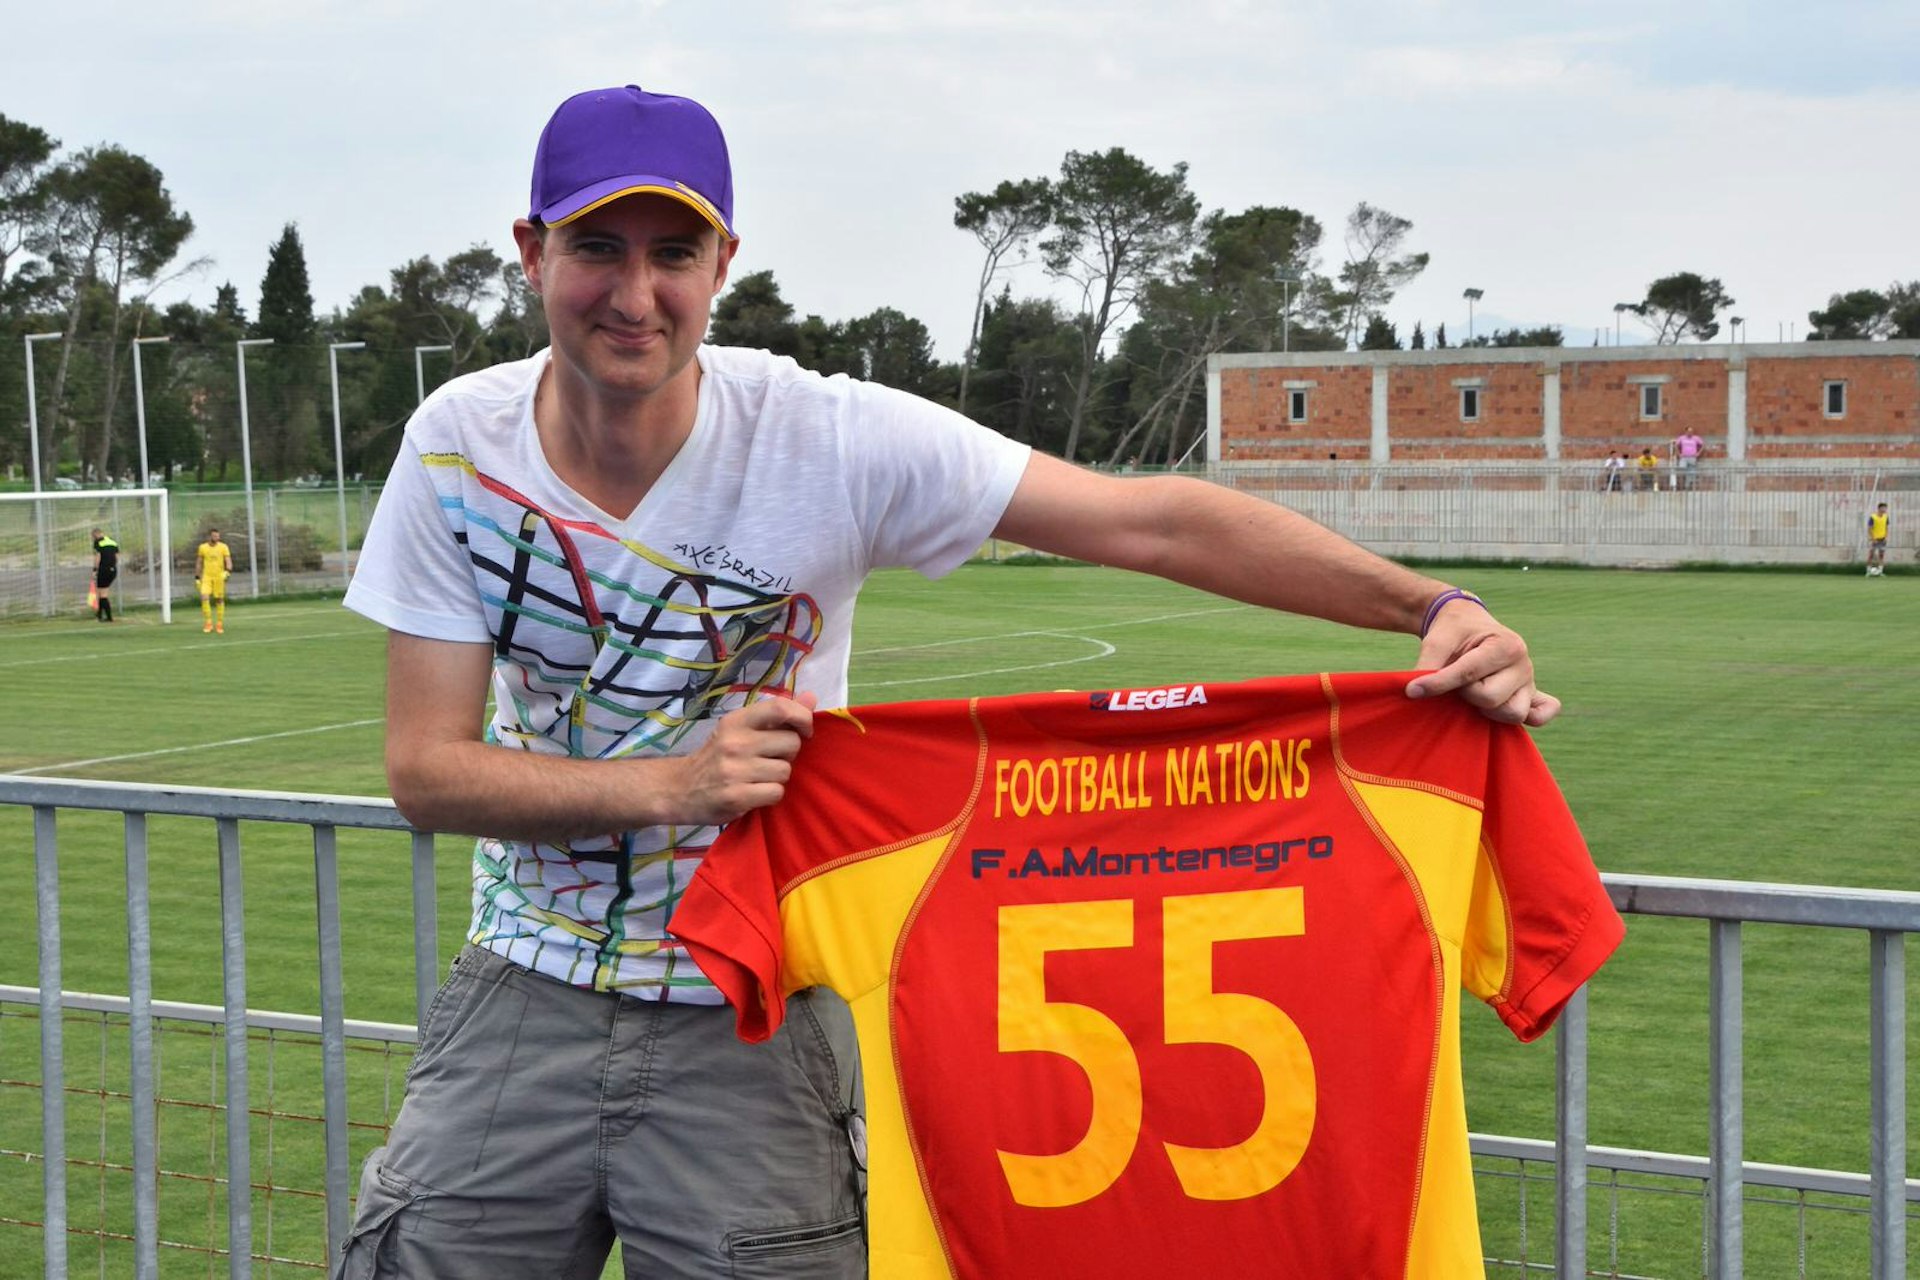 Matt stands next to a football pitch in Montenegro, holding a shirt with the number 55 on it